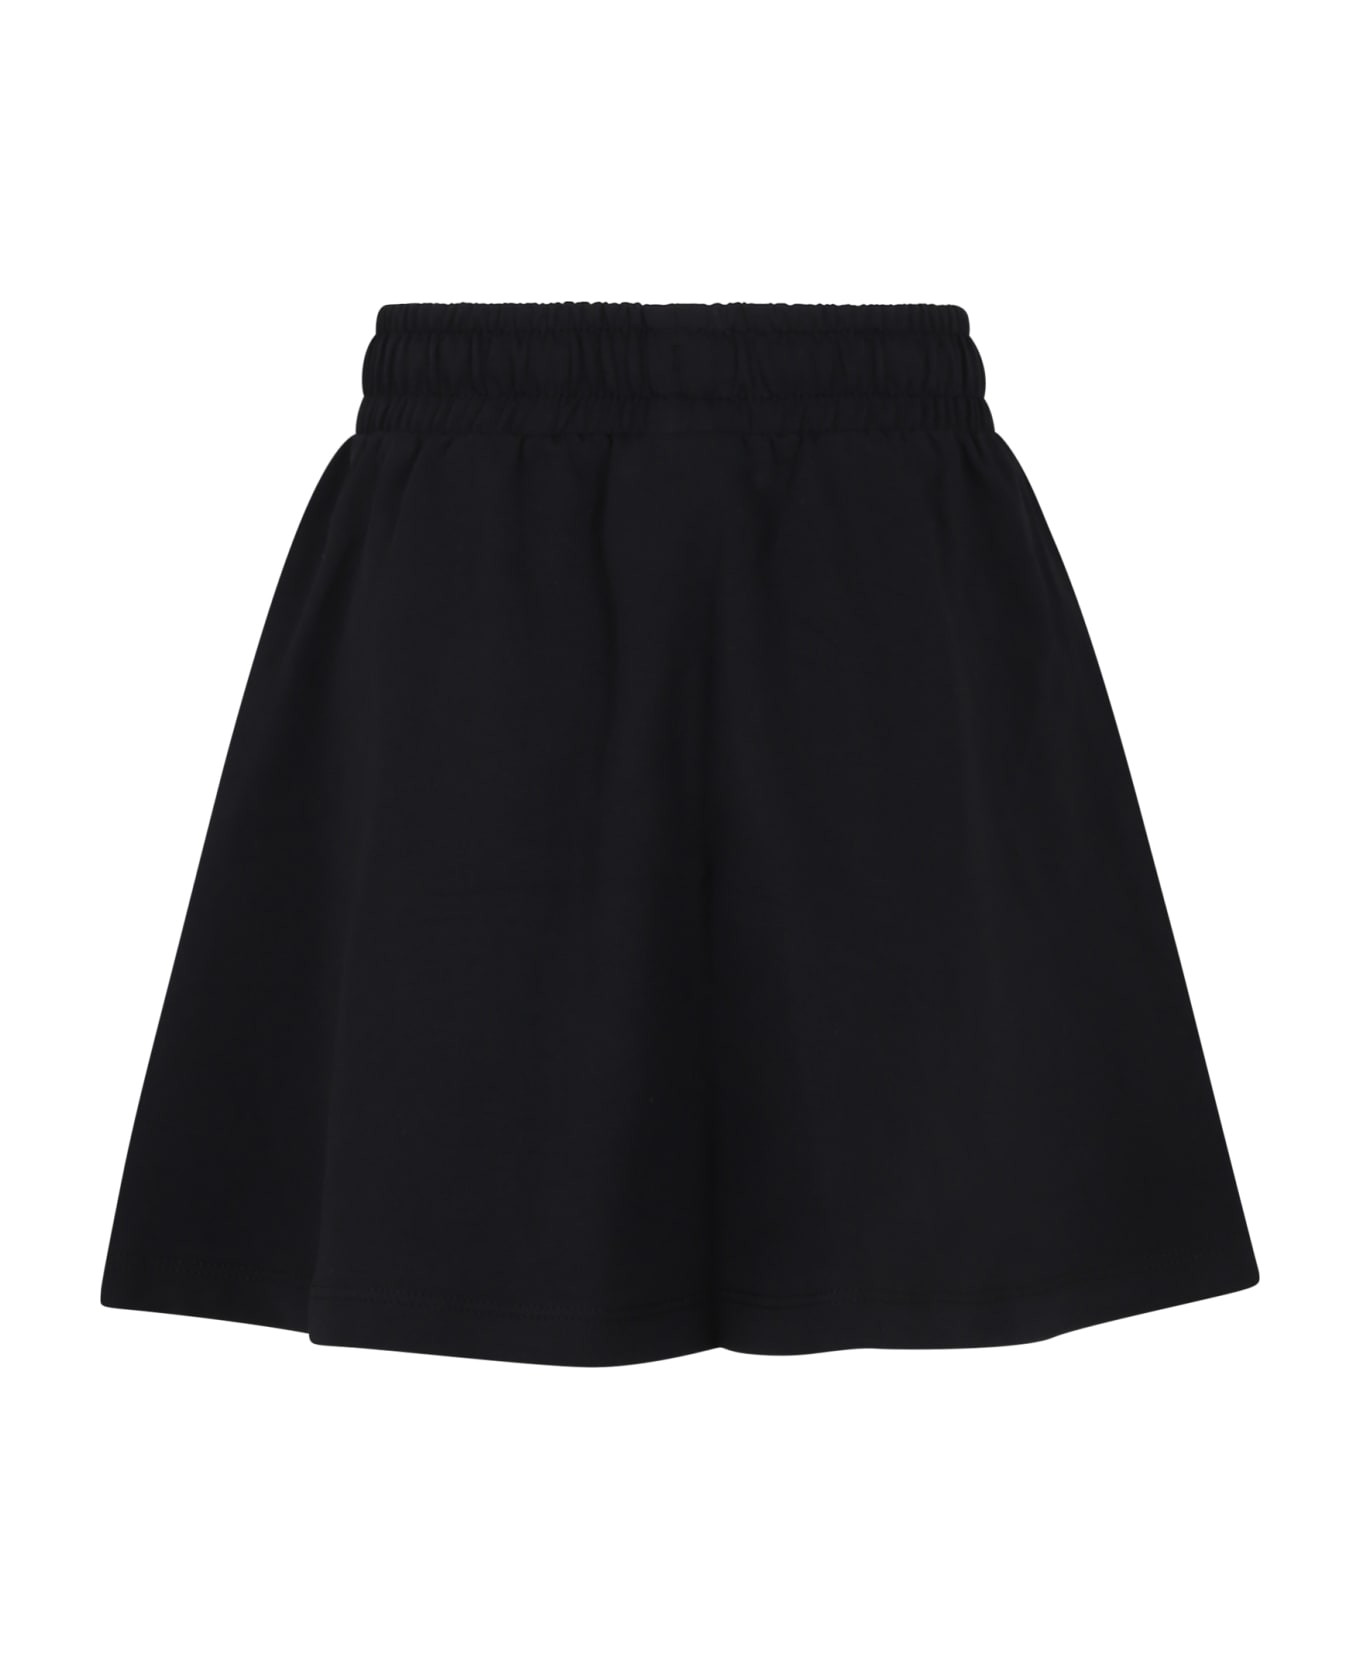 Moschino Black Skirt For Girl With Teddy Bear And Logo - Black ボトムス